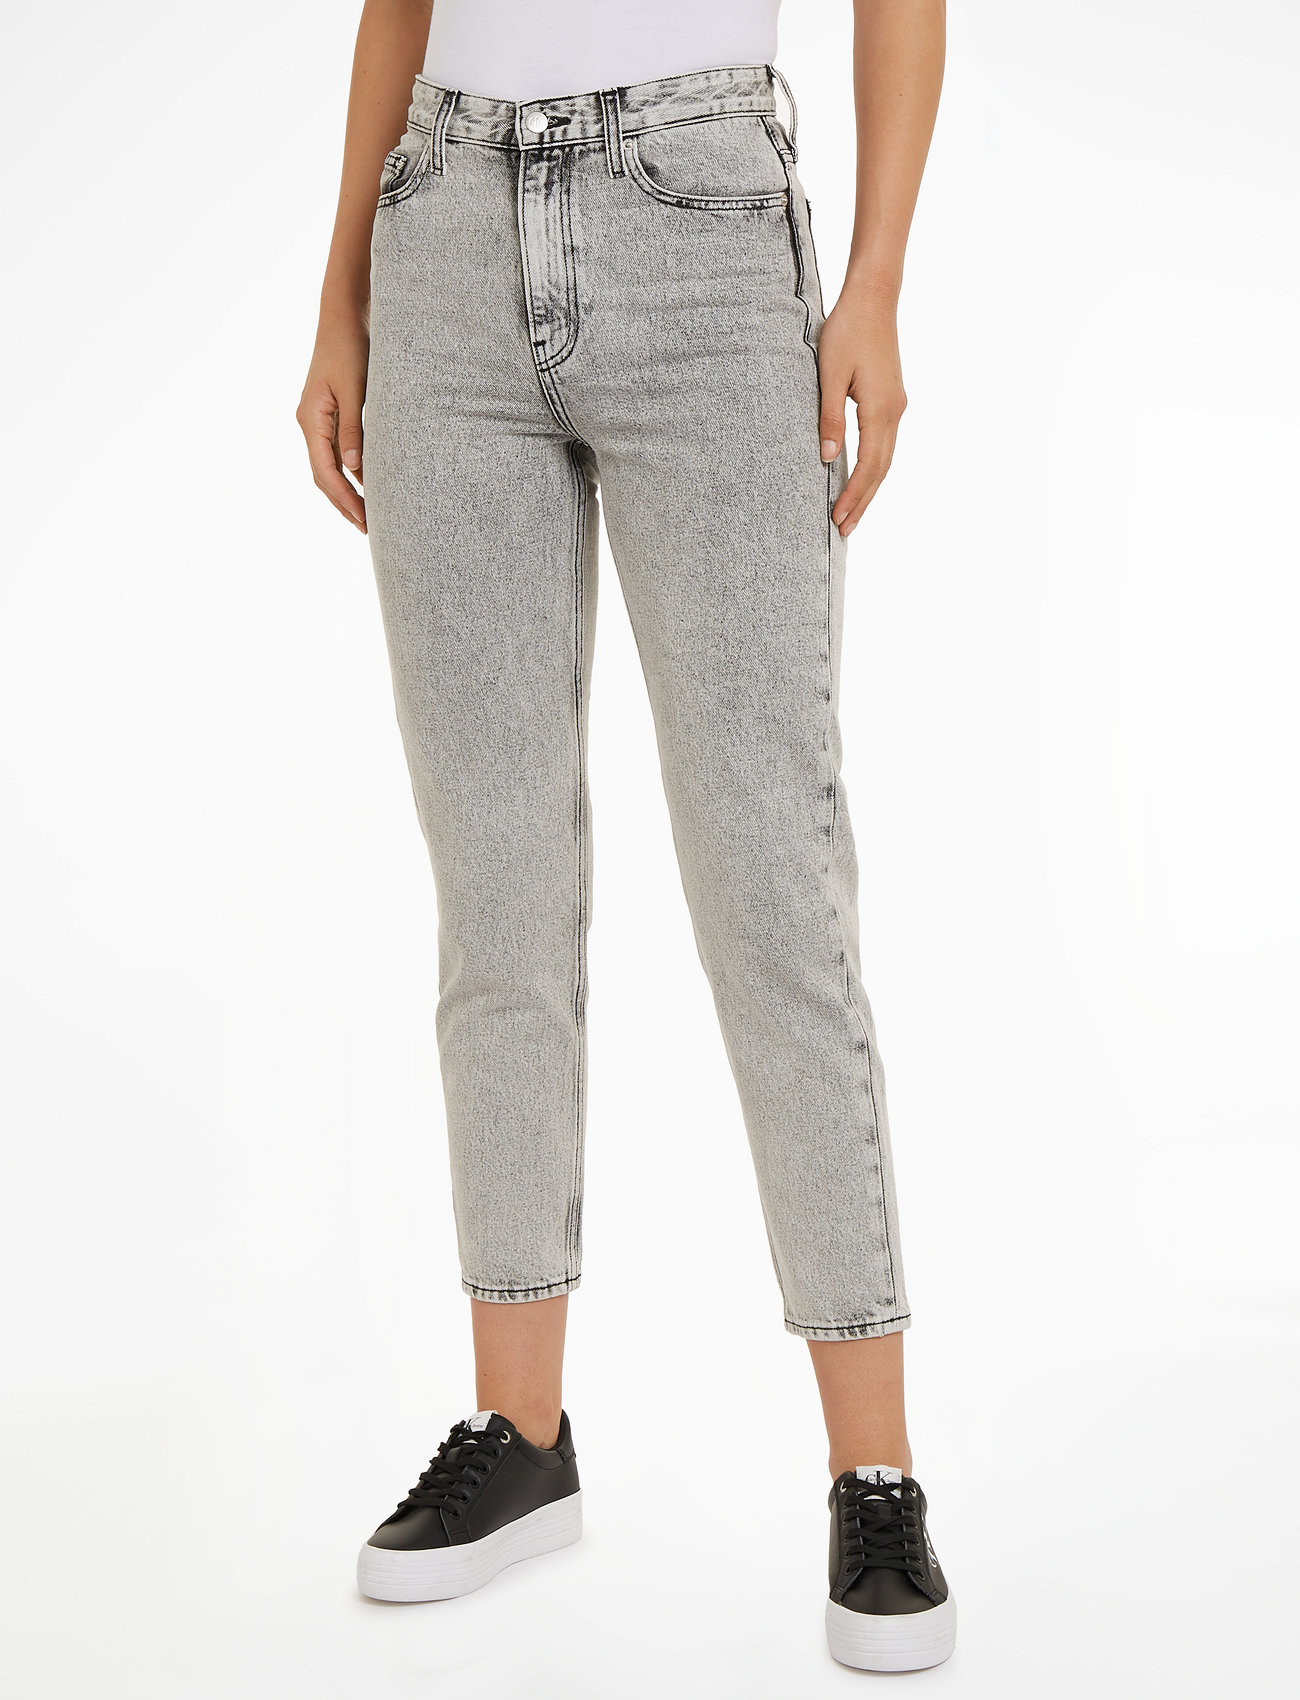 Women's Mom jeans | Explore our New Arrivals | ZARA